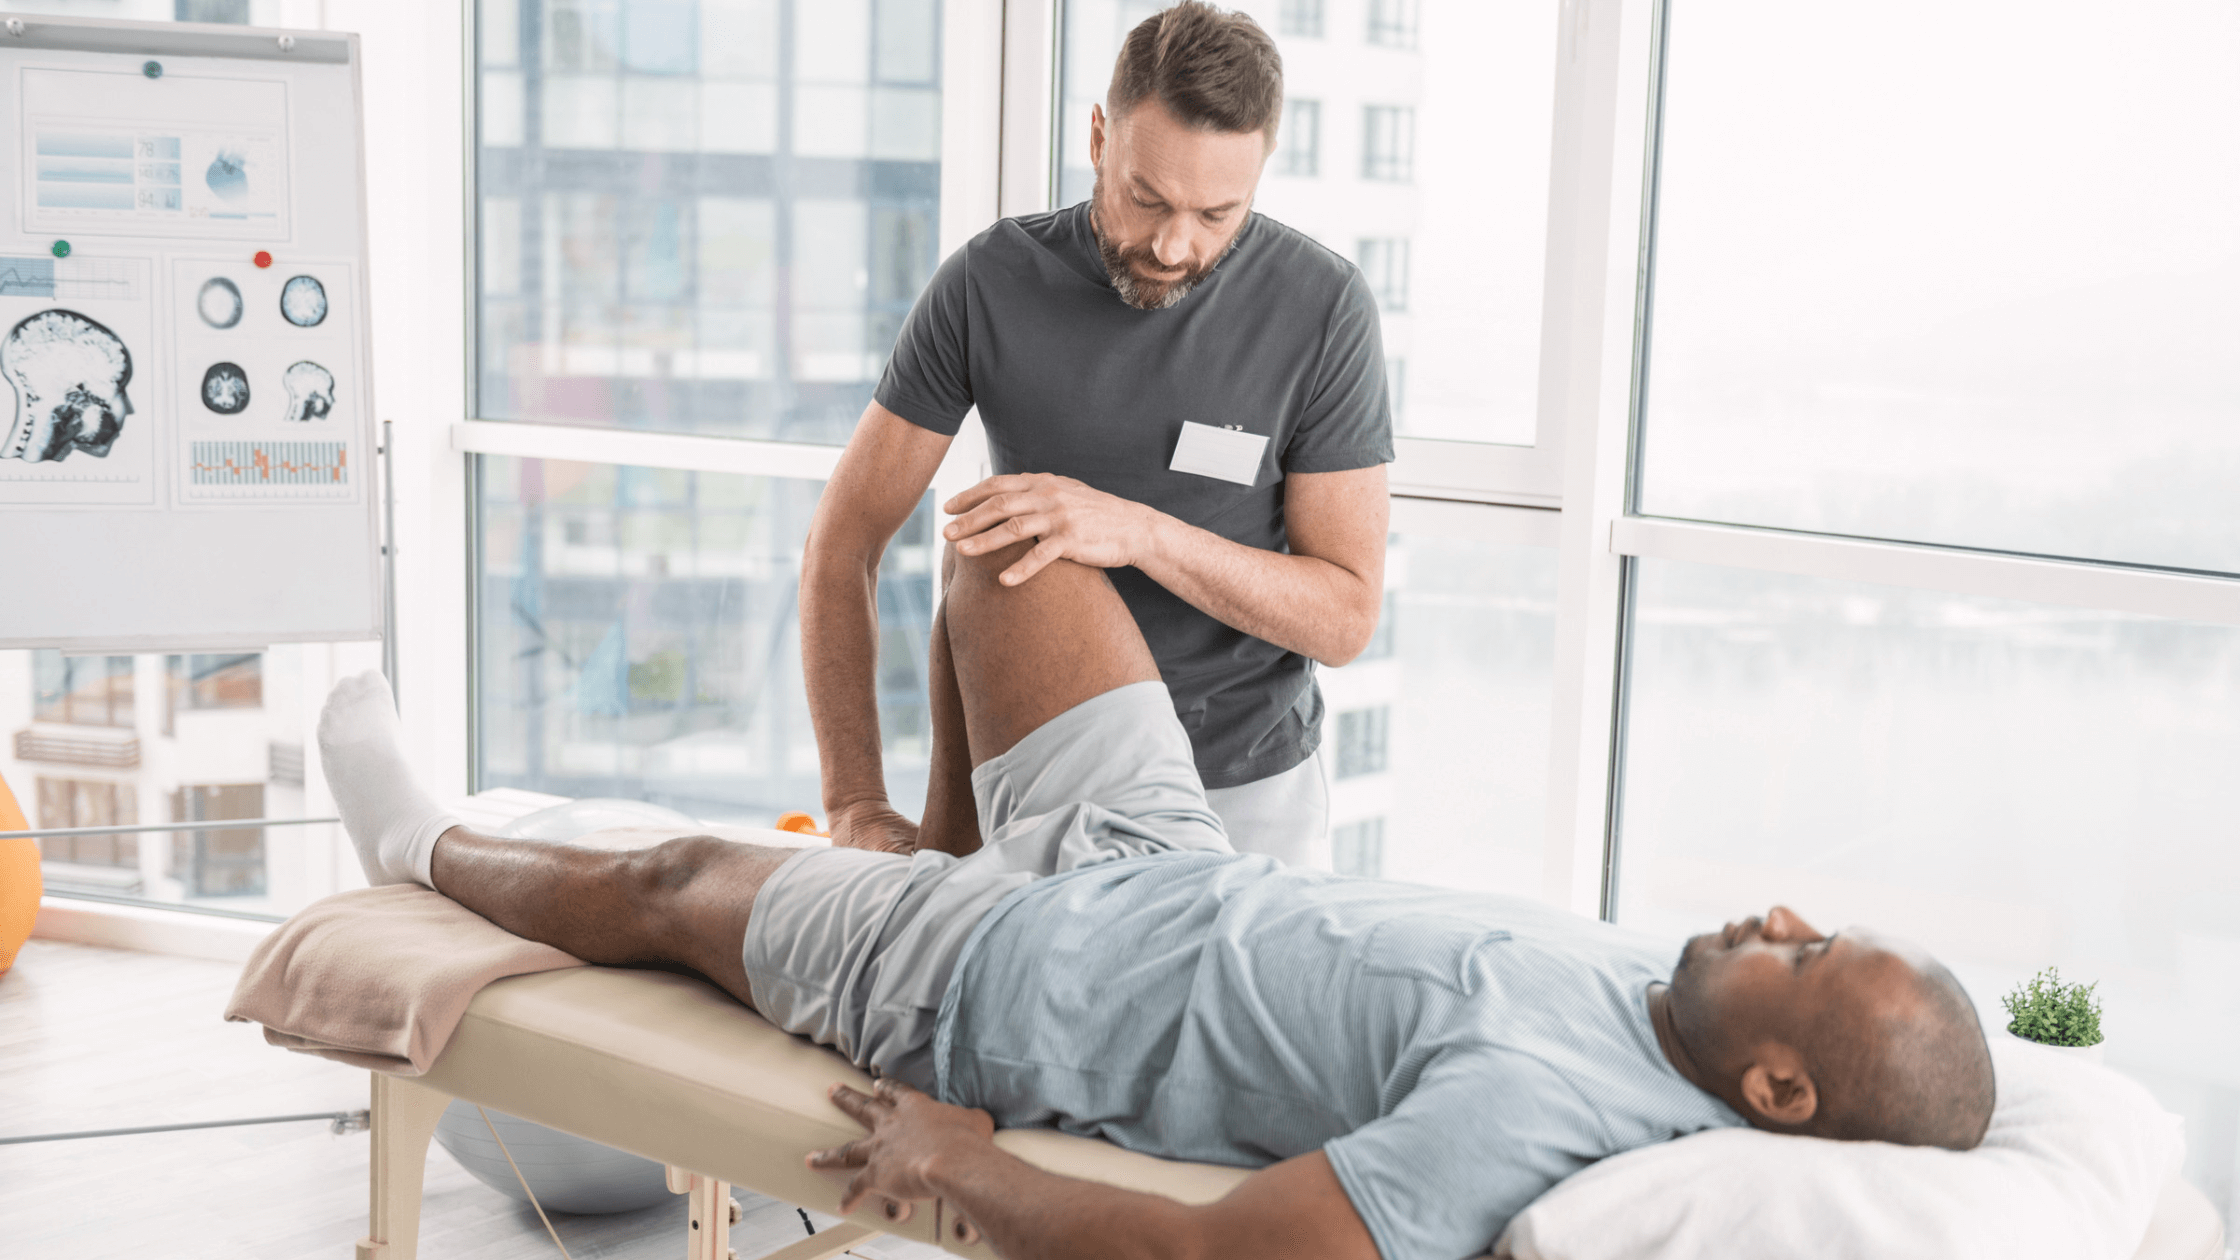 Want To Be A Physical Therapist You Need These 8 Personal Qualities